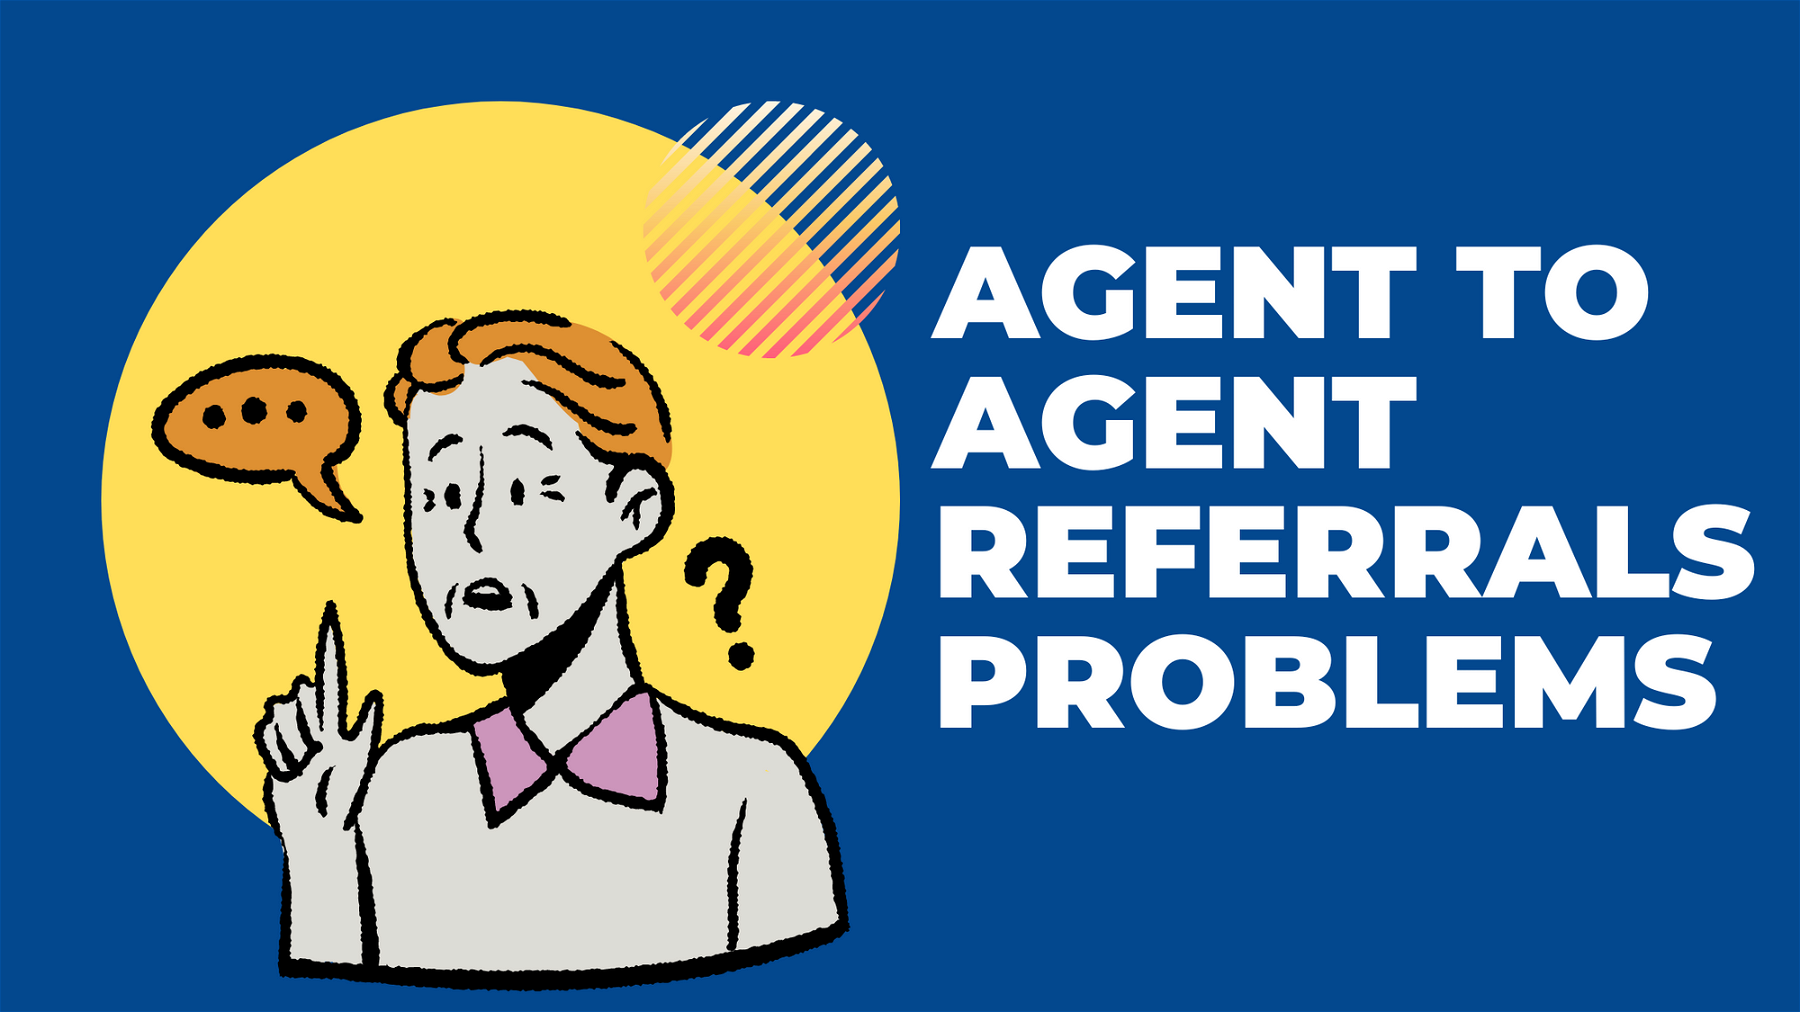 Agent to Agent Referrals: The Most Frequent Problems